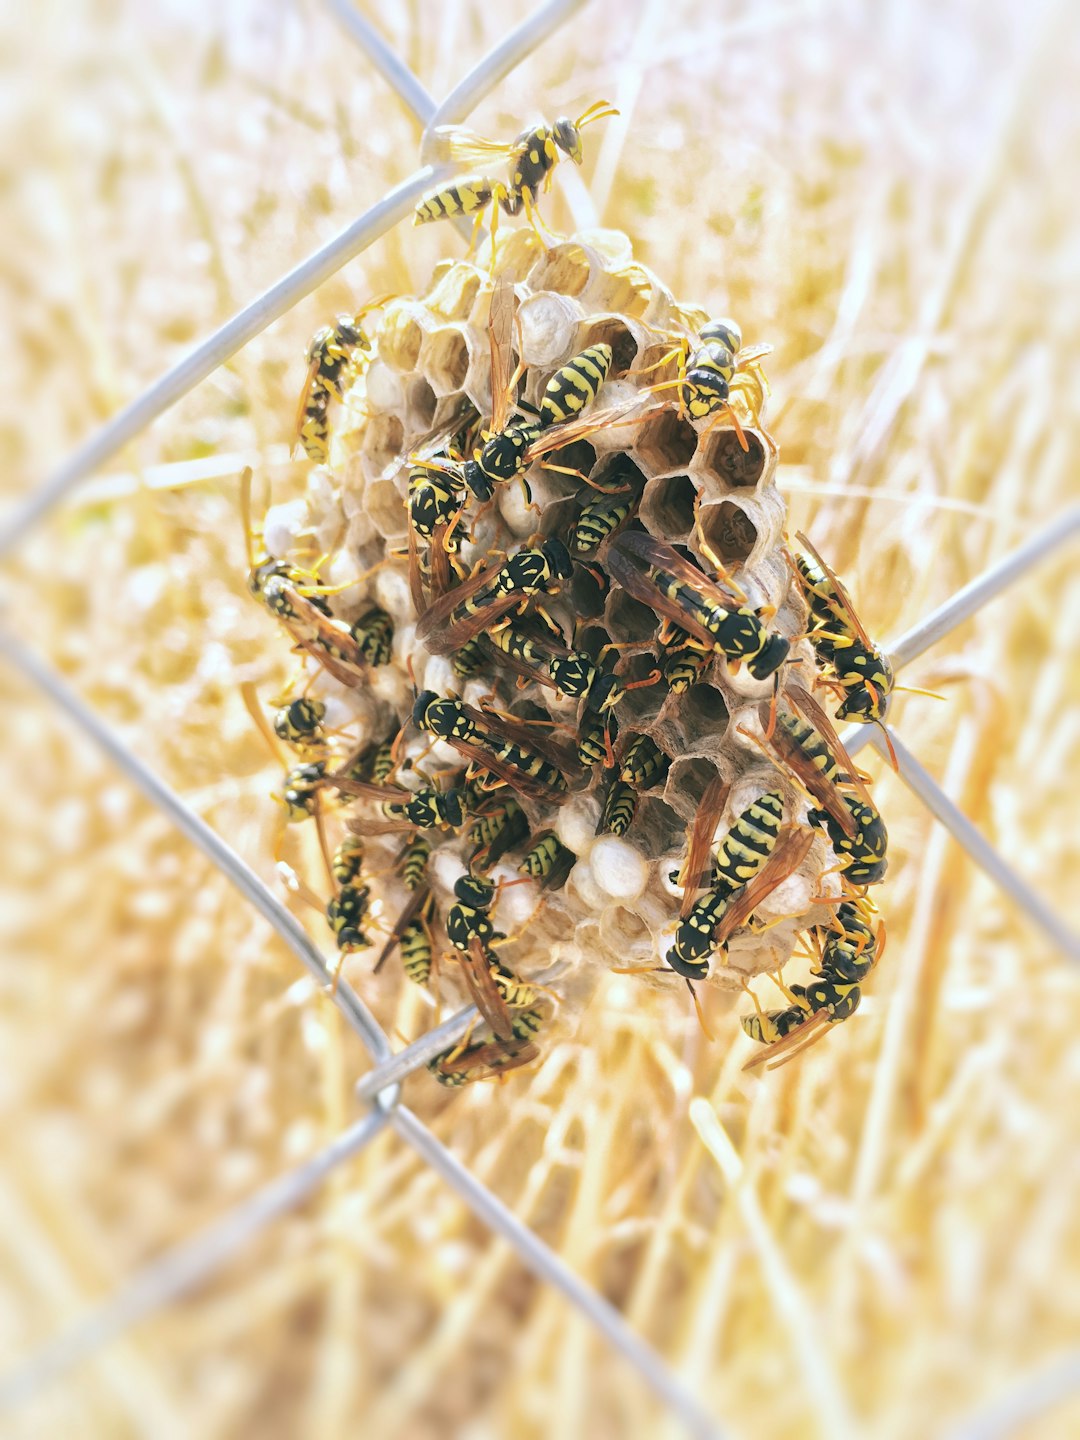 swarm of yellowjacket wasp on hive